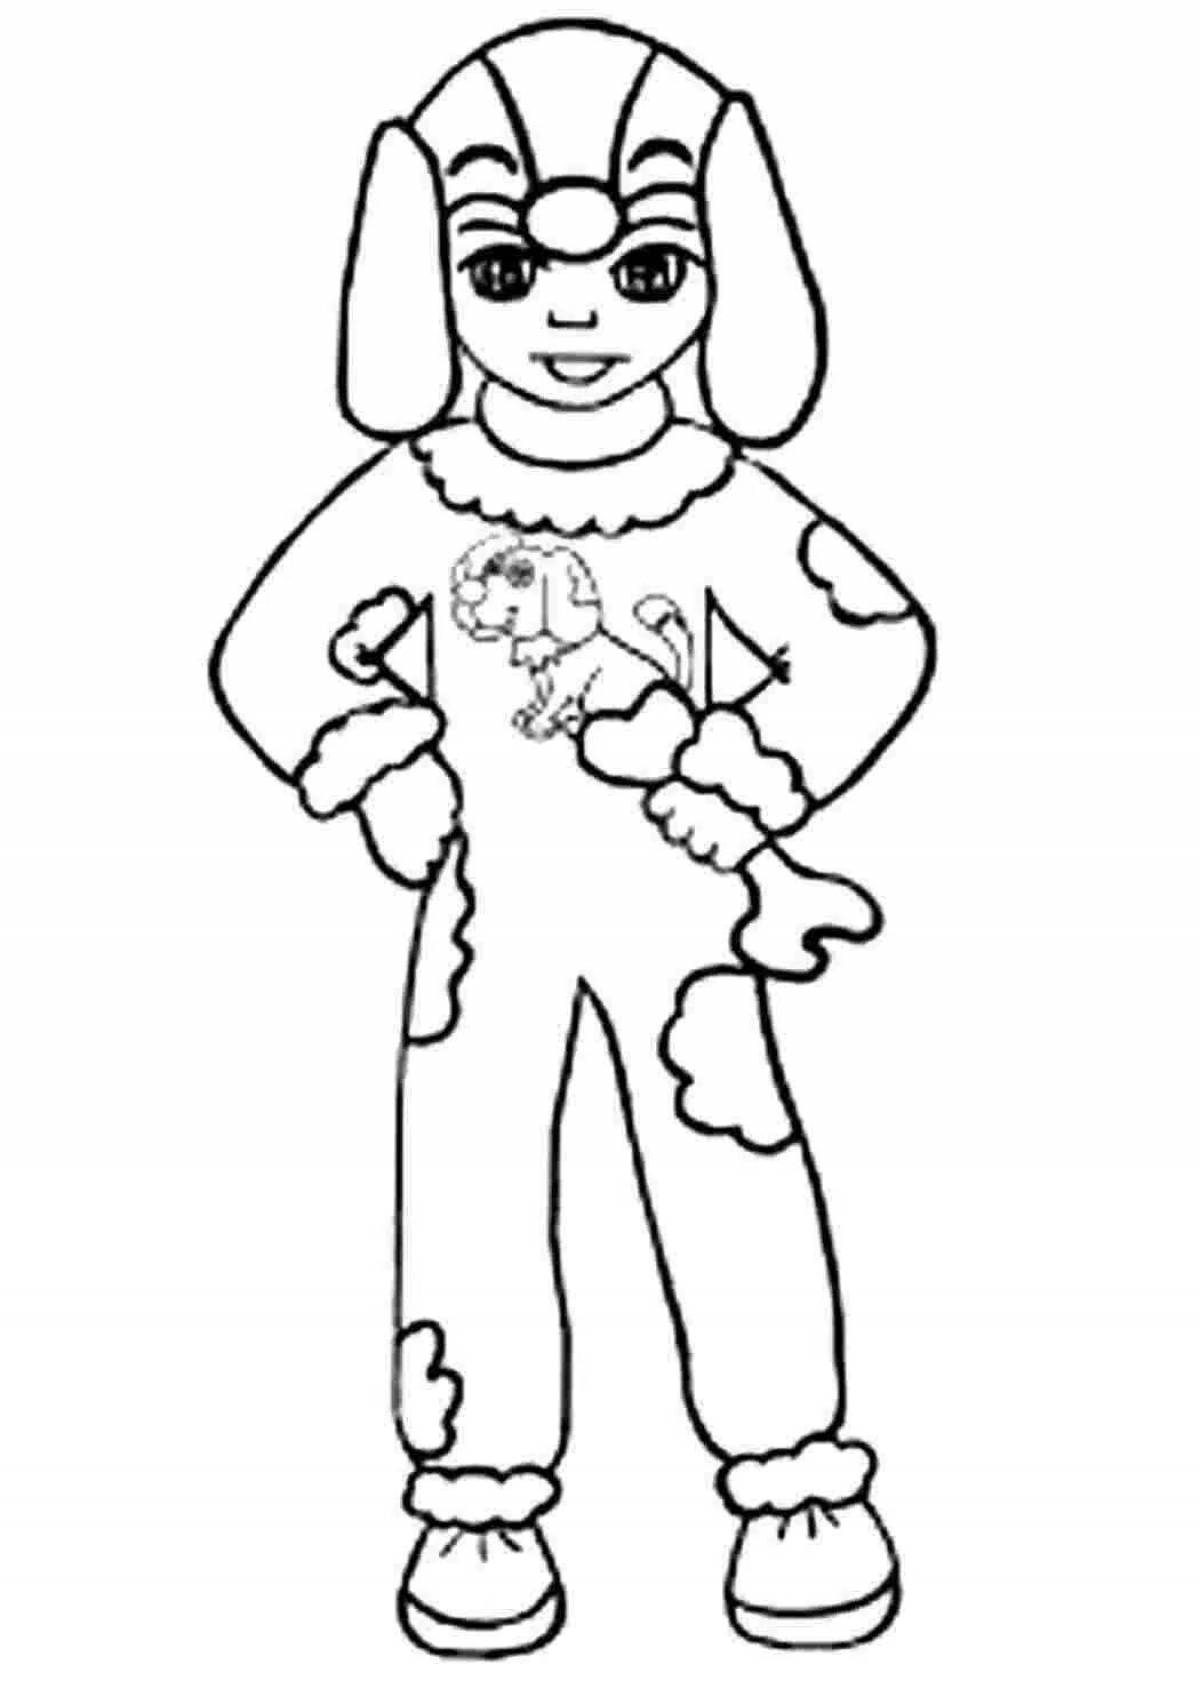 Coloring page shiny carnival costume